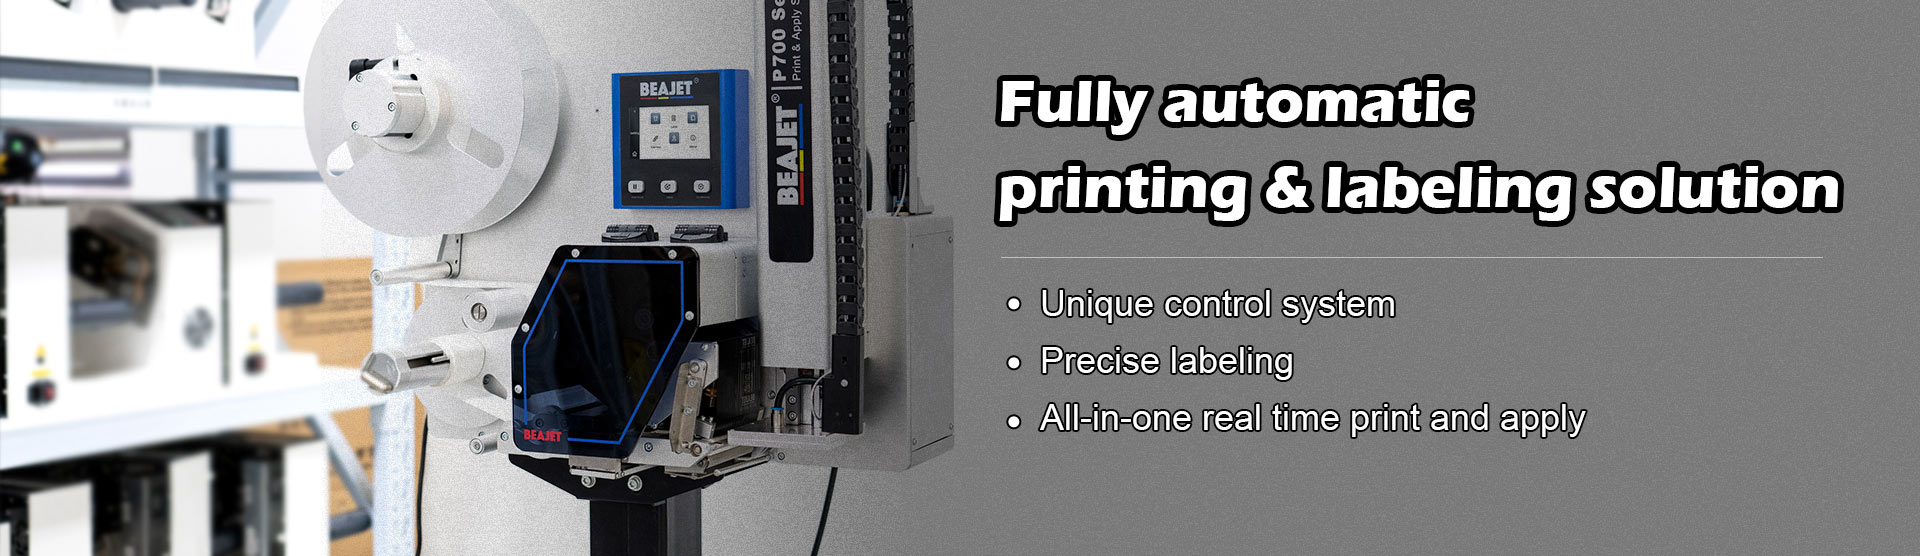 Print and Apply Labeling System - 翻译中...